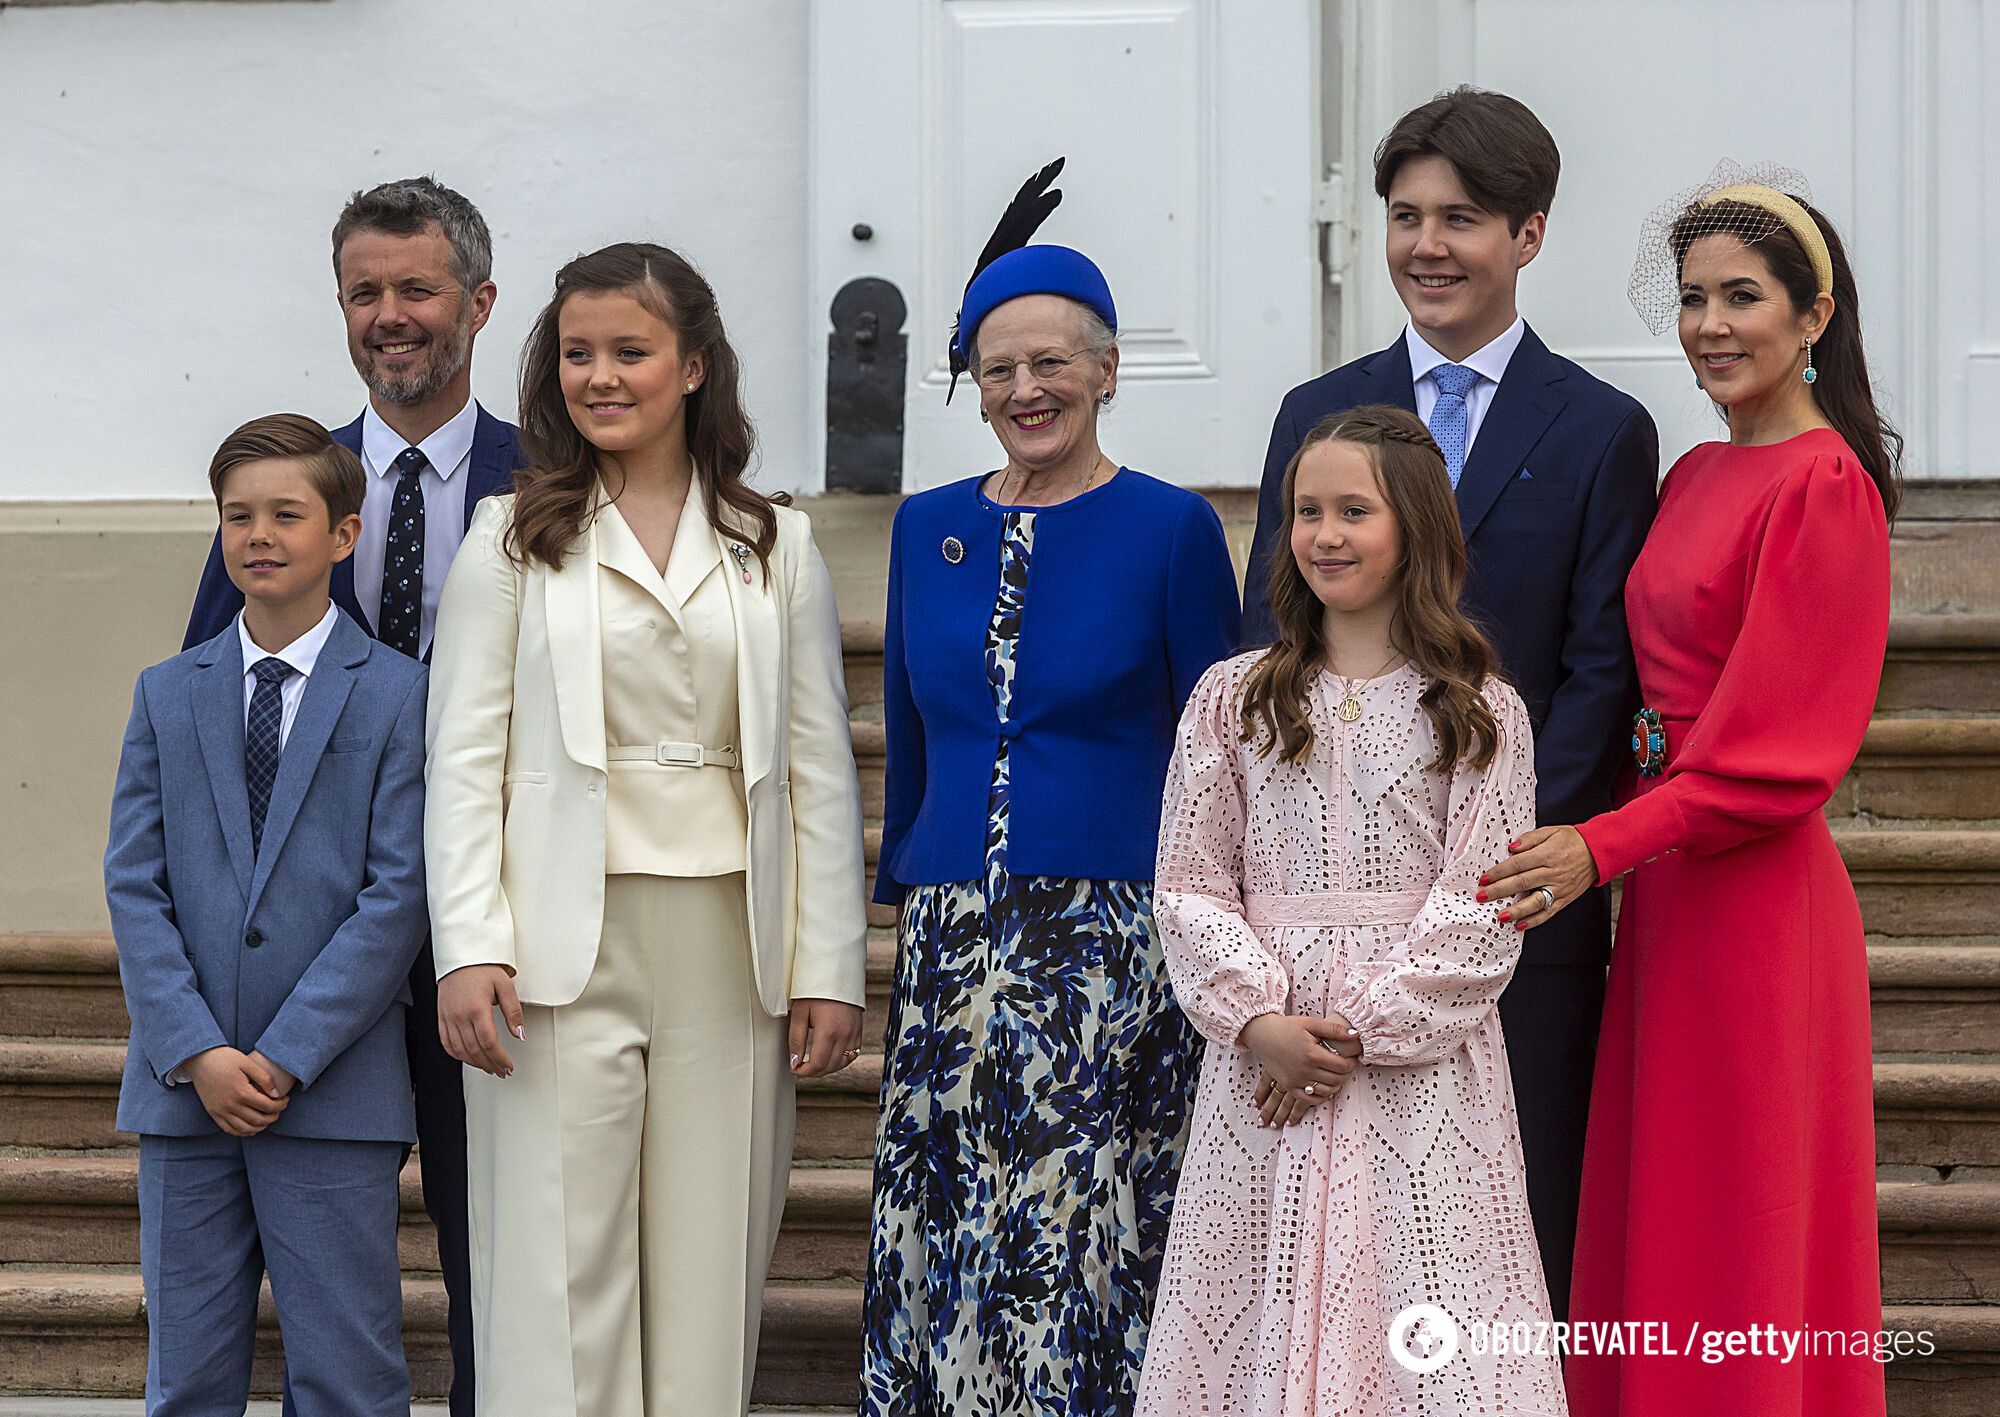 He was considered a playboy and accused of treason: what is known about the new King of Denmark, Frederik X, whose mother abdicated the throne. Photo